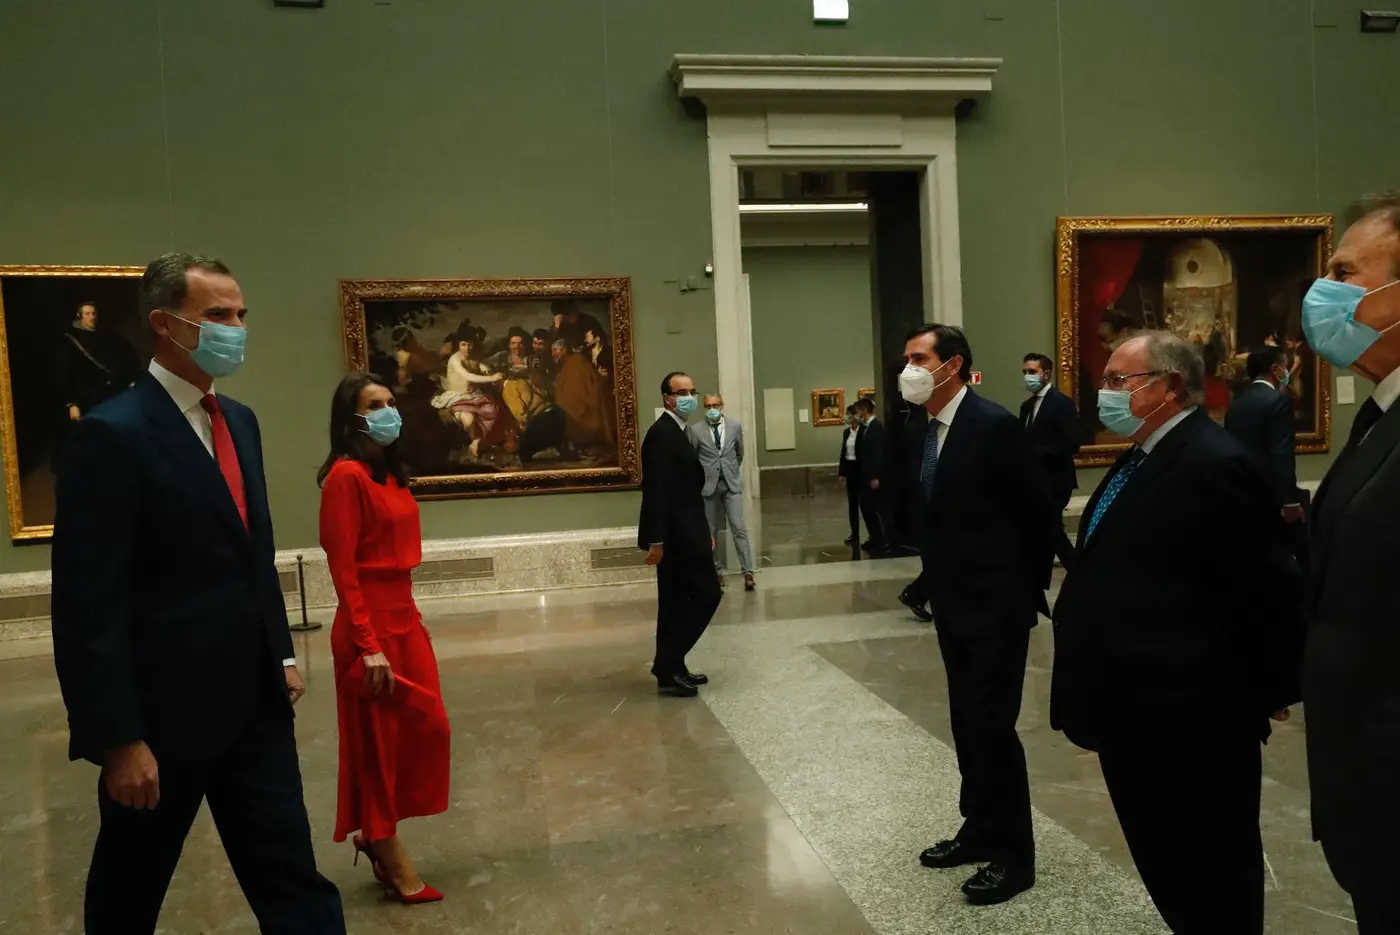 King Felipe and Queen Letizia of Spain touring the the Prado Museum during the launch of Spain for Sure Campaign